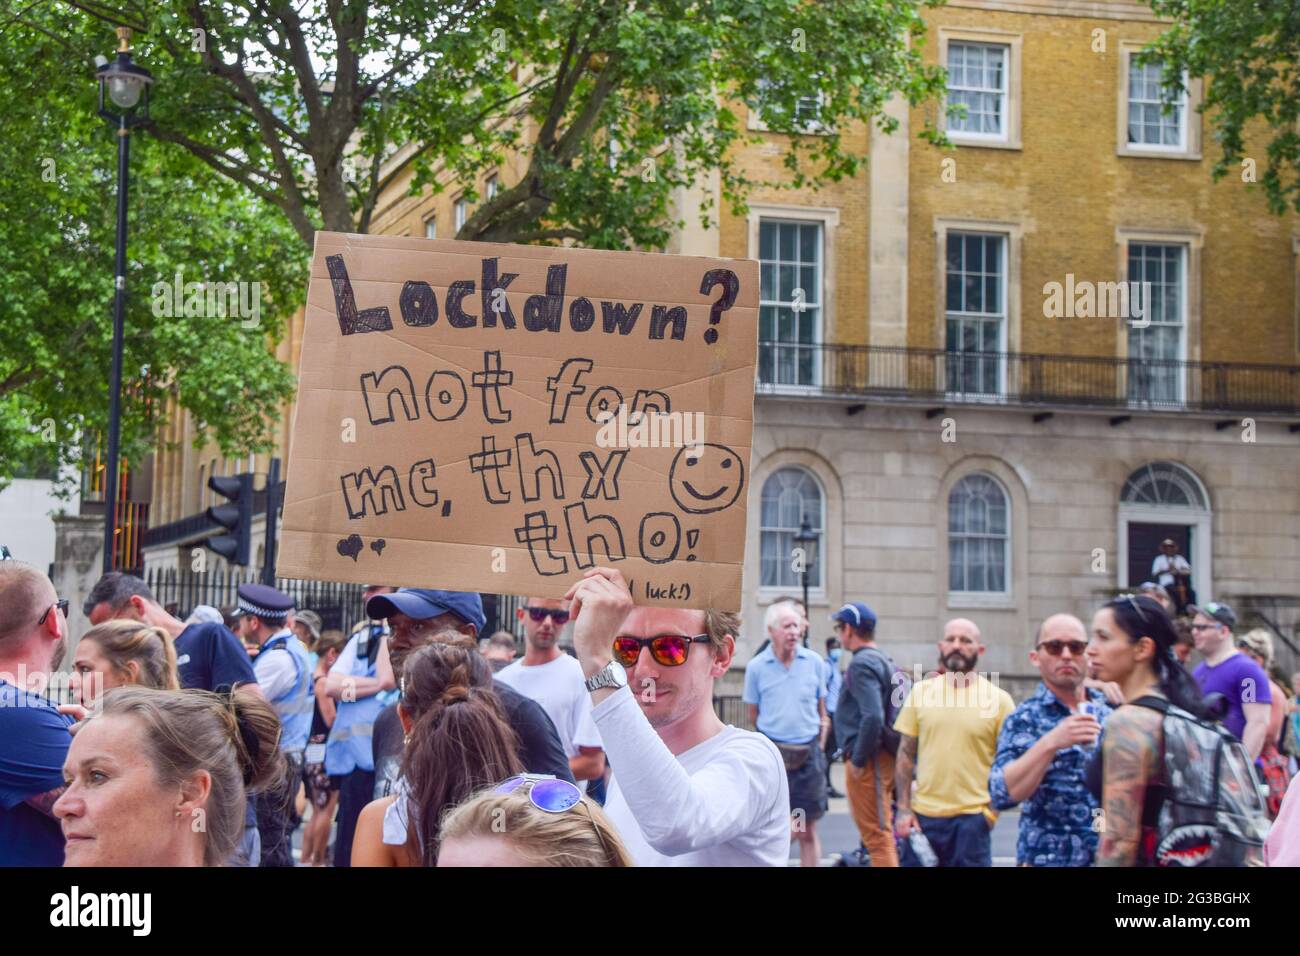 London, United Kingdom. 14th June 2021. Protesters outside Downing Street. Anti-lockdown, anti-vaccine and anti-mask protesters gathered outside Houses of Parliament and Downing Street as the government announced that lifting further COVID-19 restrictions will be delayed until July 19th. Stock Photo